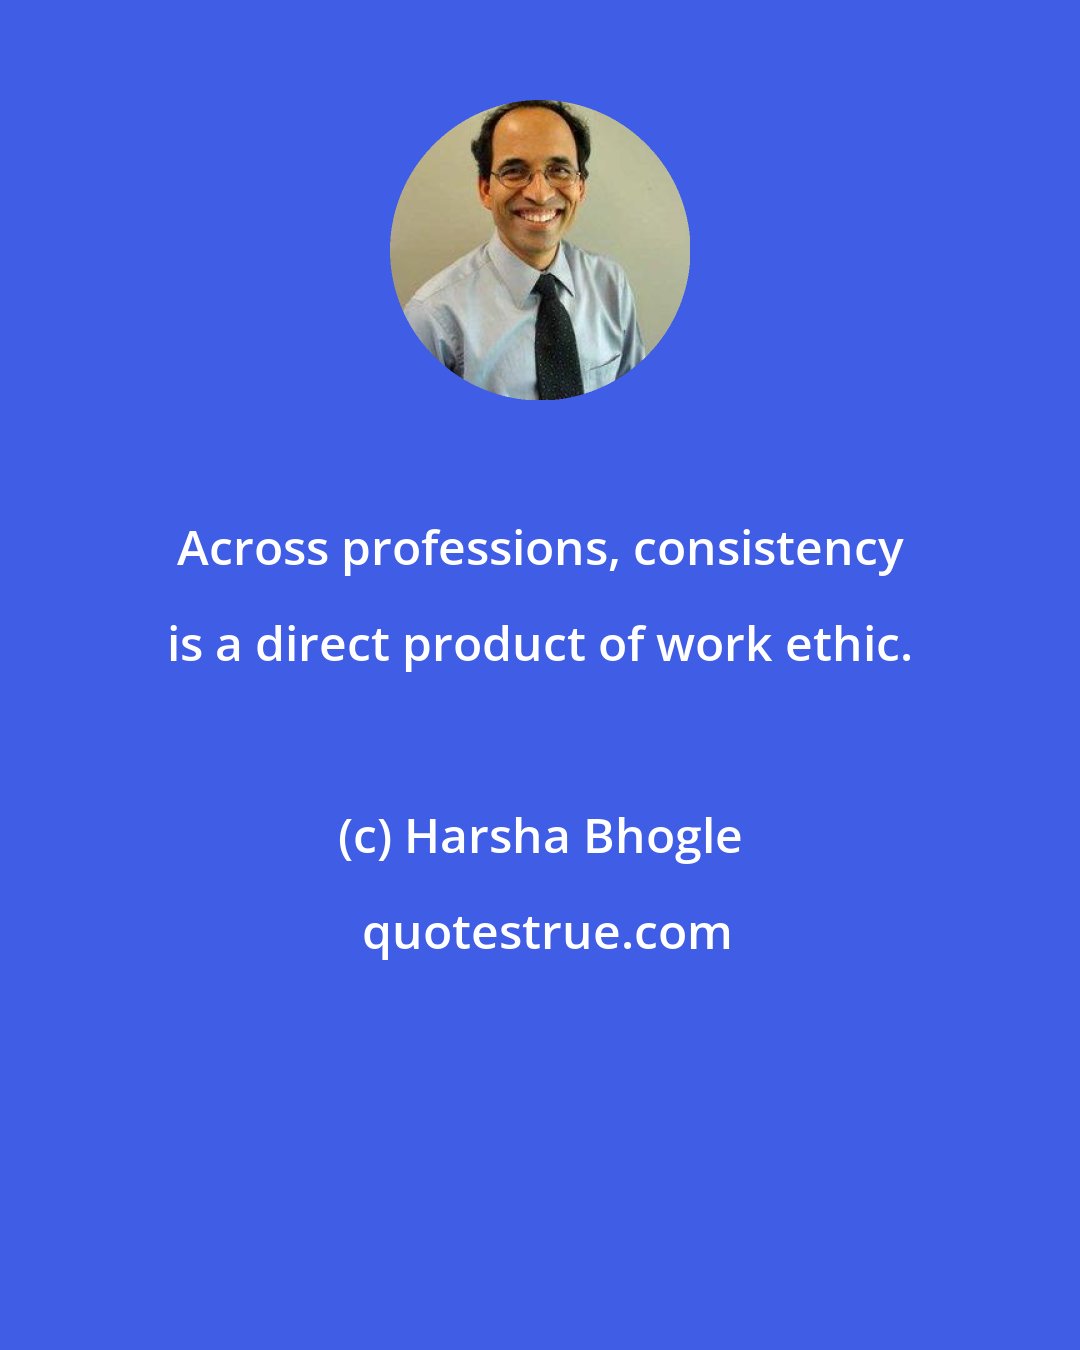 Harsha Bhogle: Across professions, consistency is a direct product of work ethic.